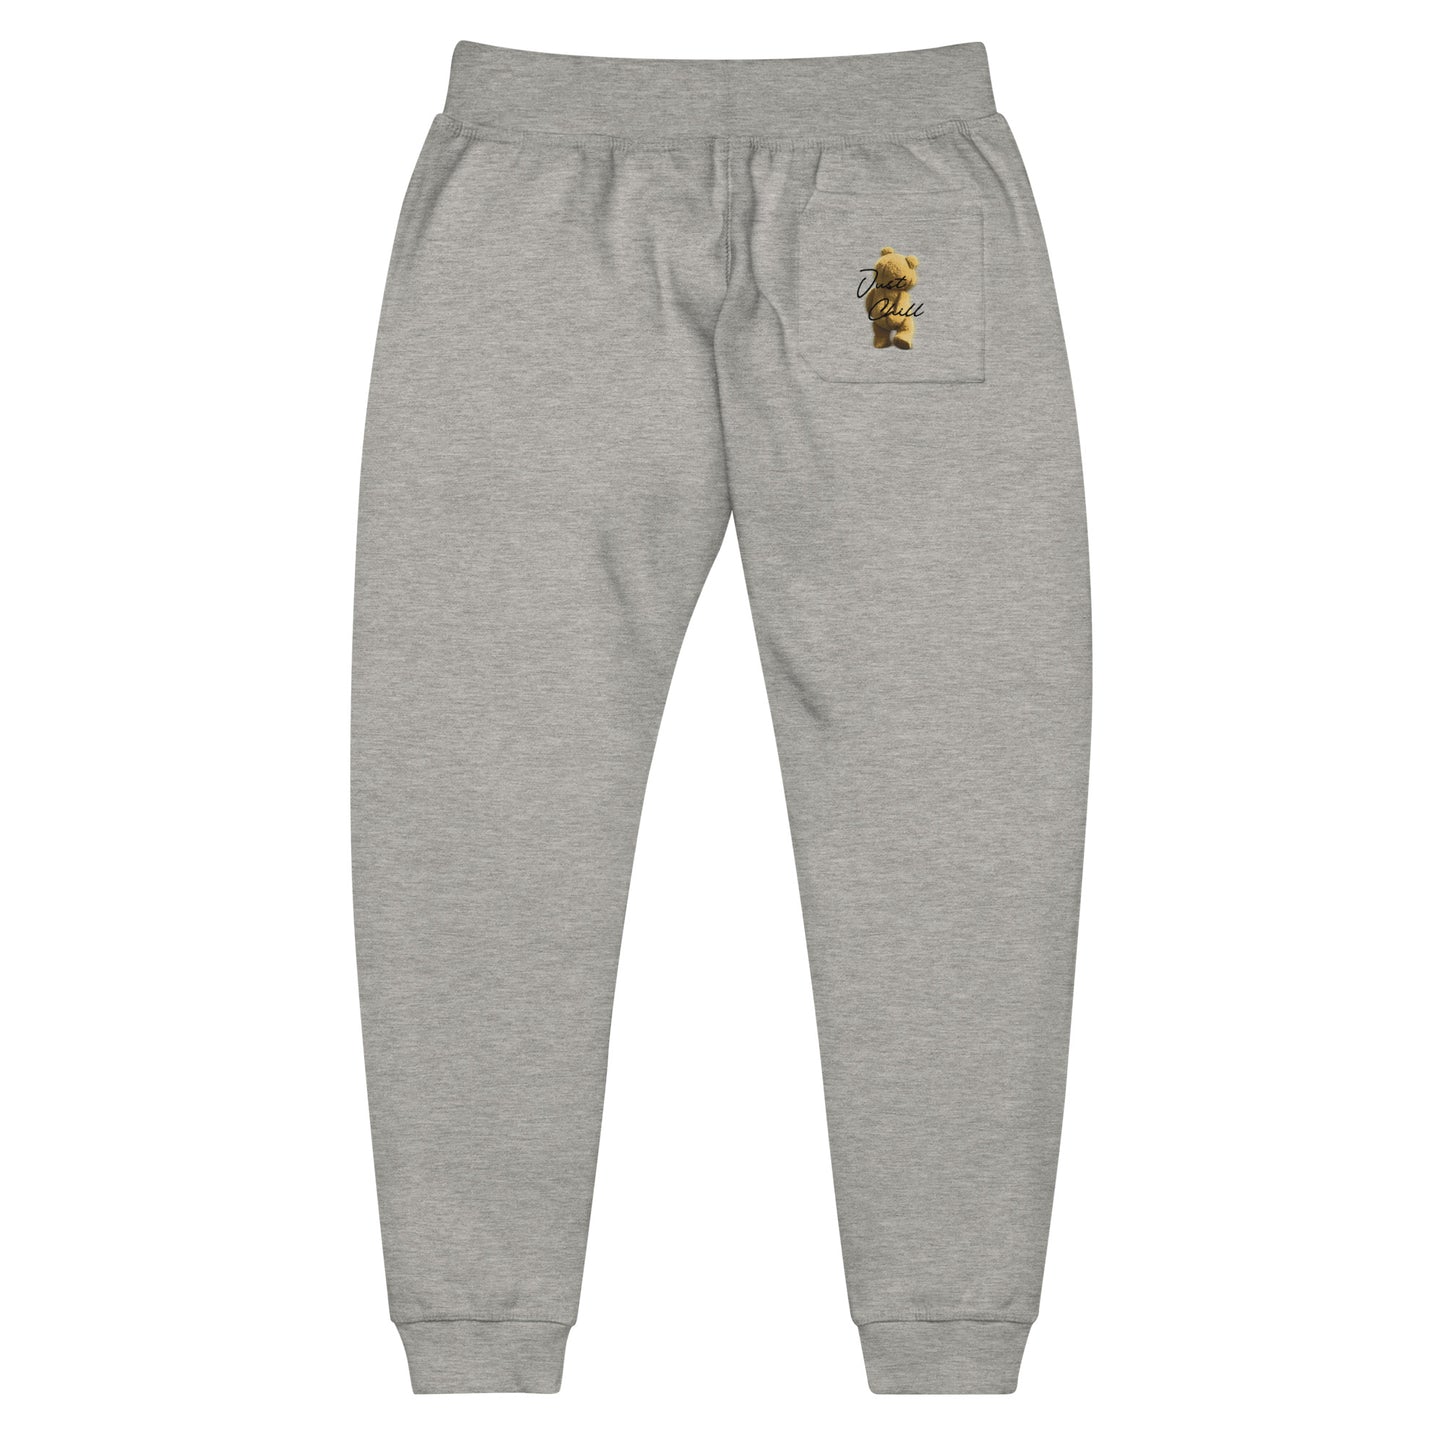 Just Chill Grey Fleece Joggers - Black Letters